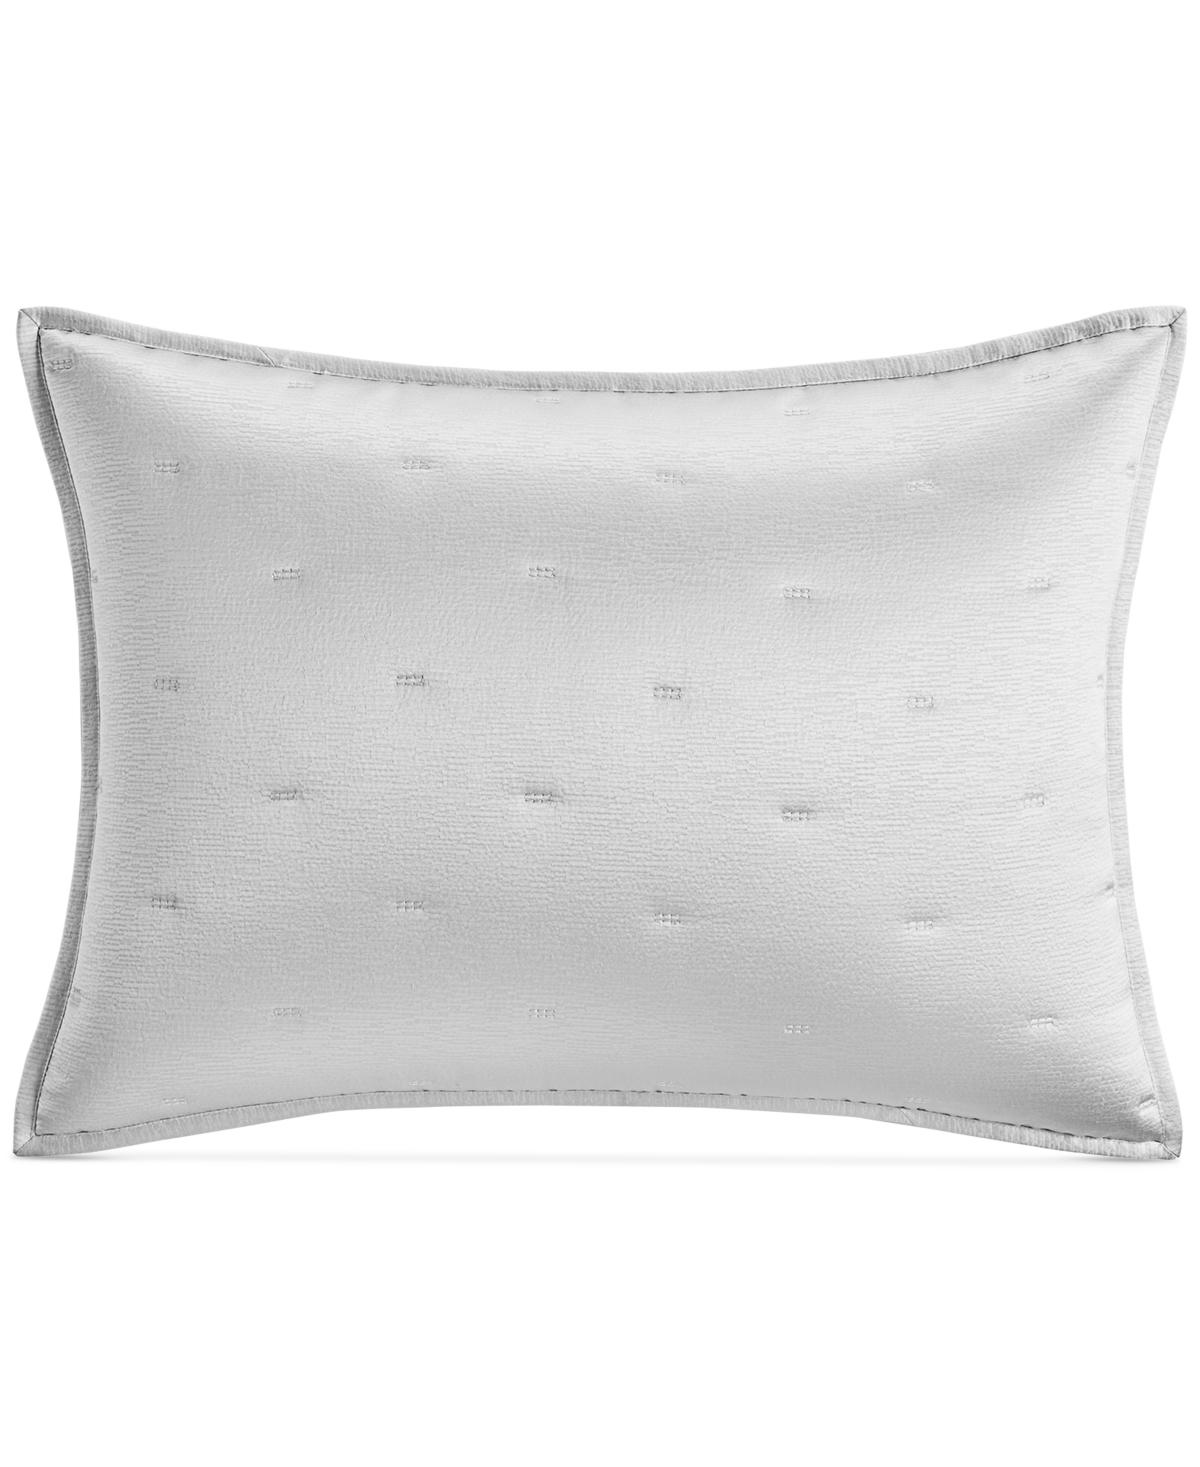 Closeout! Hotel Collection Glint Quilted Sham, King, Created for Macy's - Gold